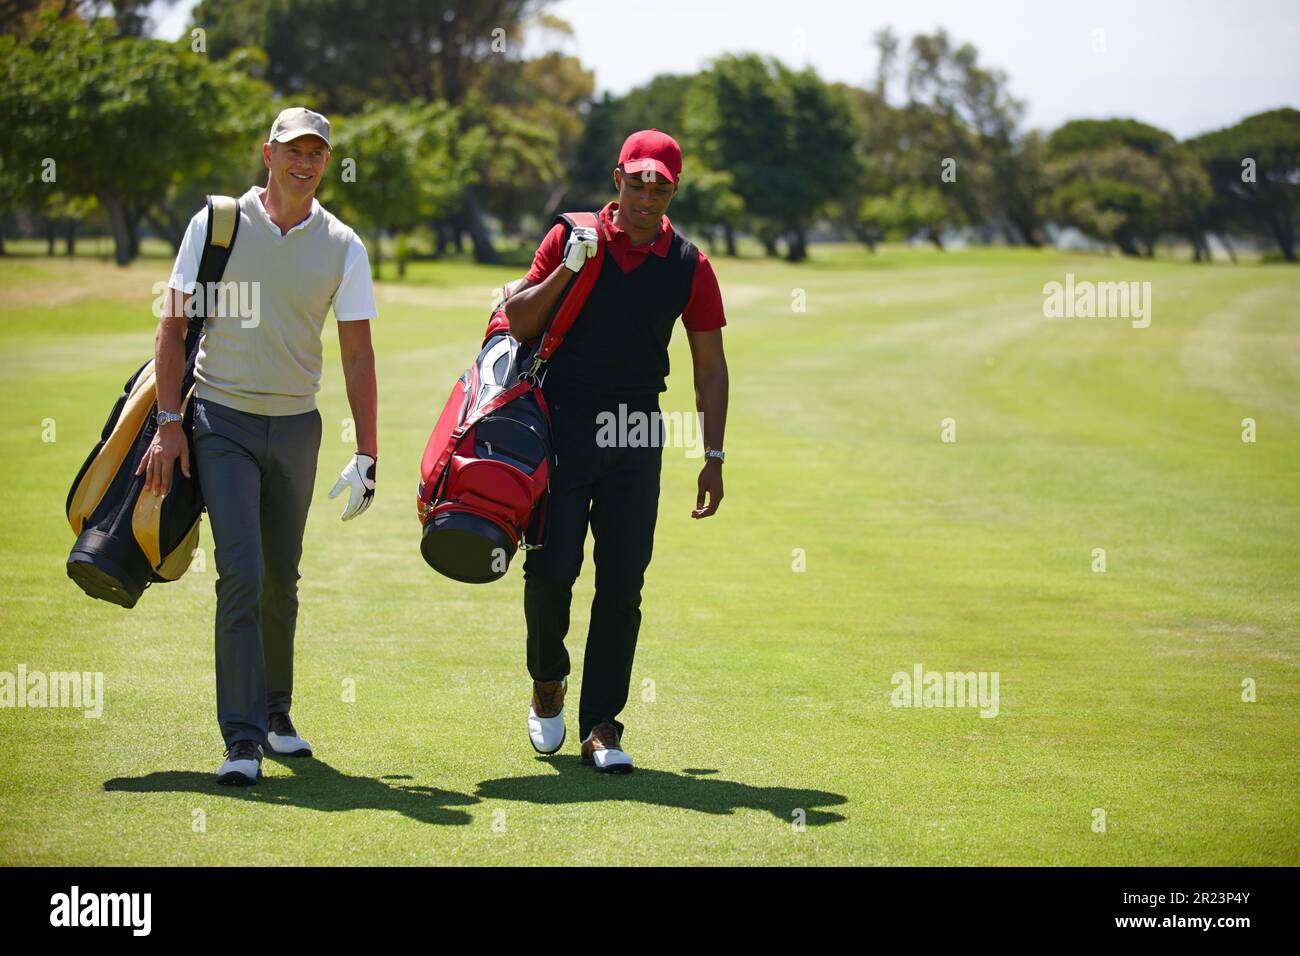 Bonding on the green. two men carrying their golf bags across a golf course. Stock Photo